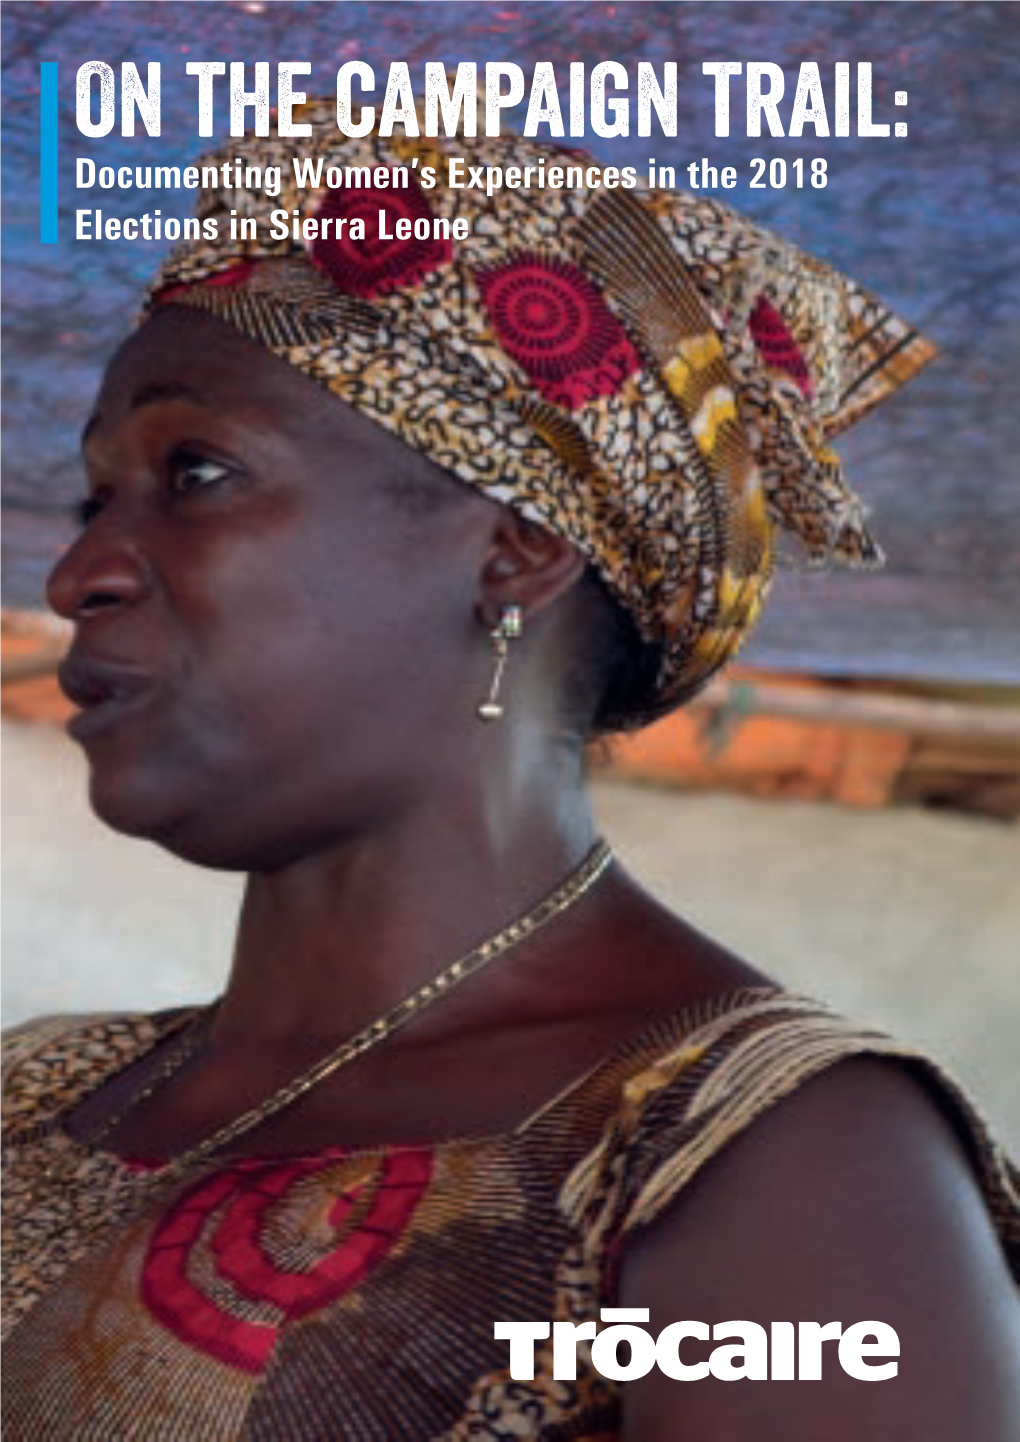 On the Campaign Trail: Documenting Women’S Experiences in the 2018 Elections in Sierra Leone Ramatulay Bah Photo: Stephen Douglas